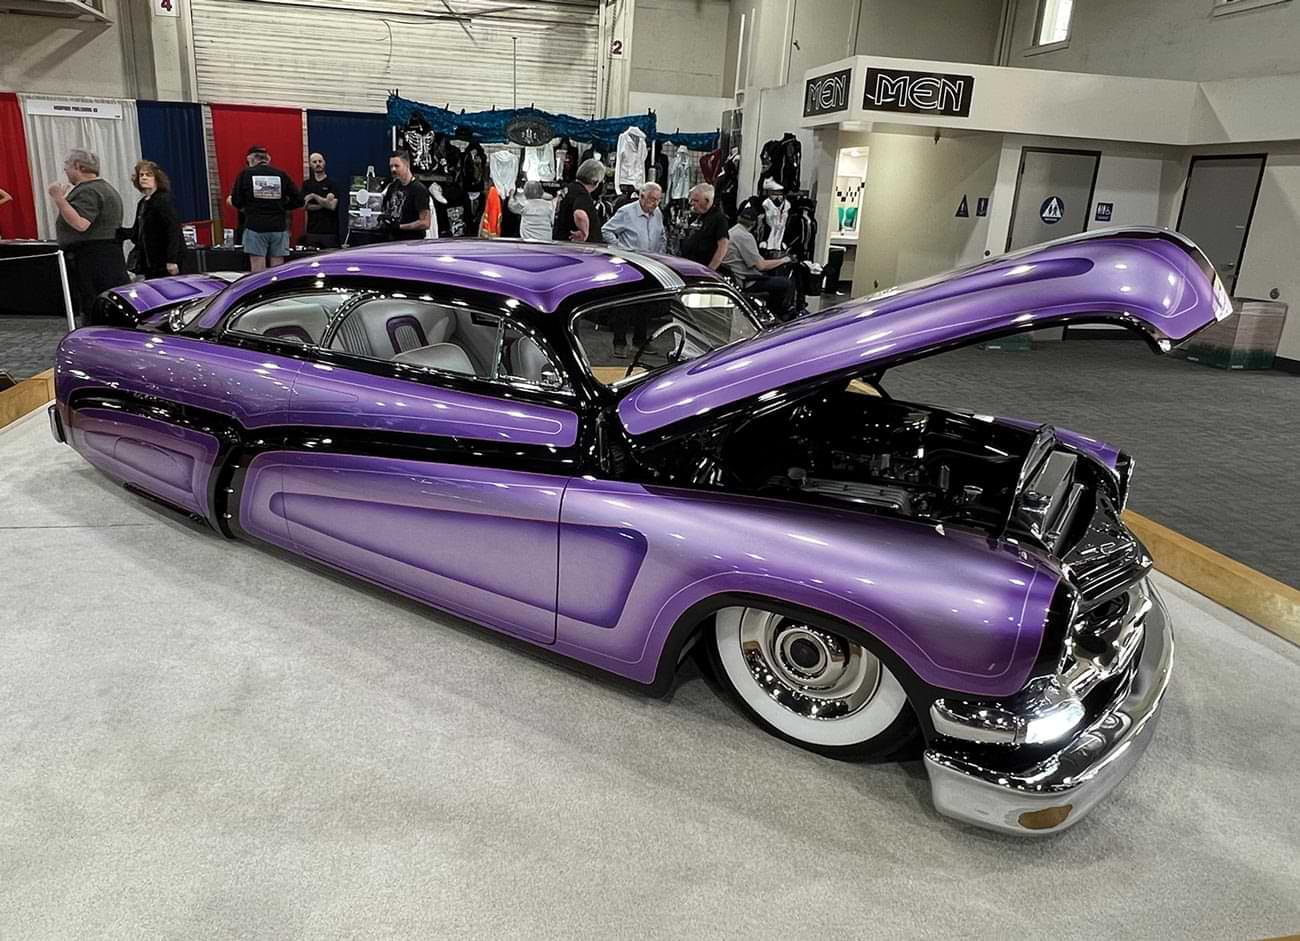 three quarter passenger side view of a ’51 Merc with a a custom purple paint job and its hood lifted